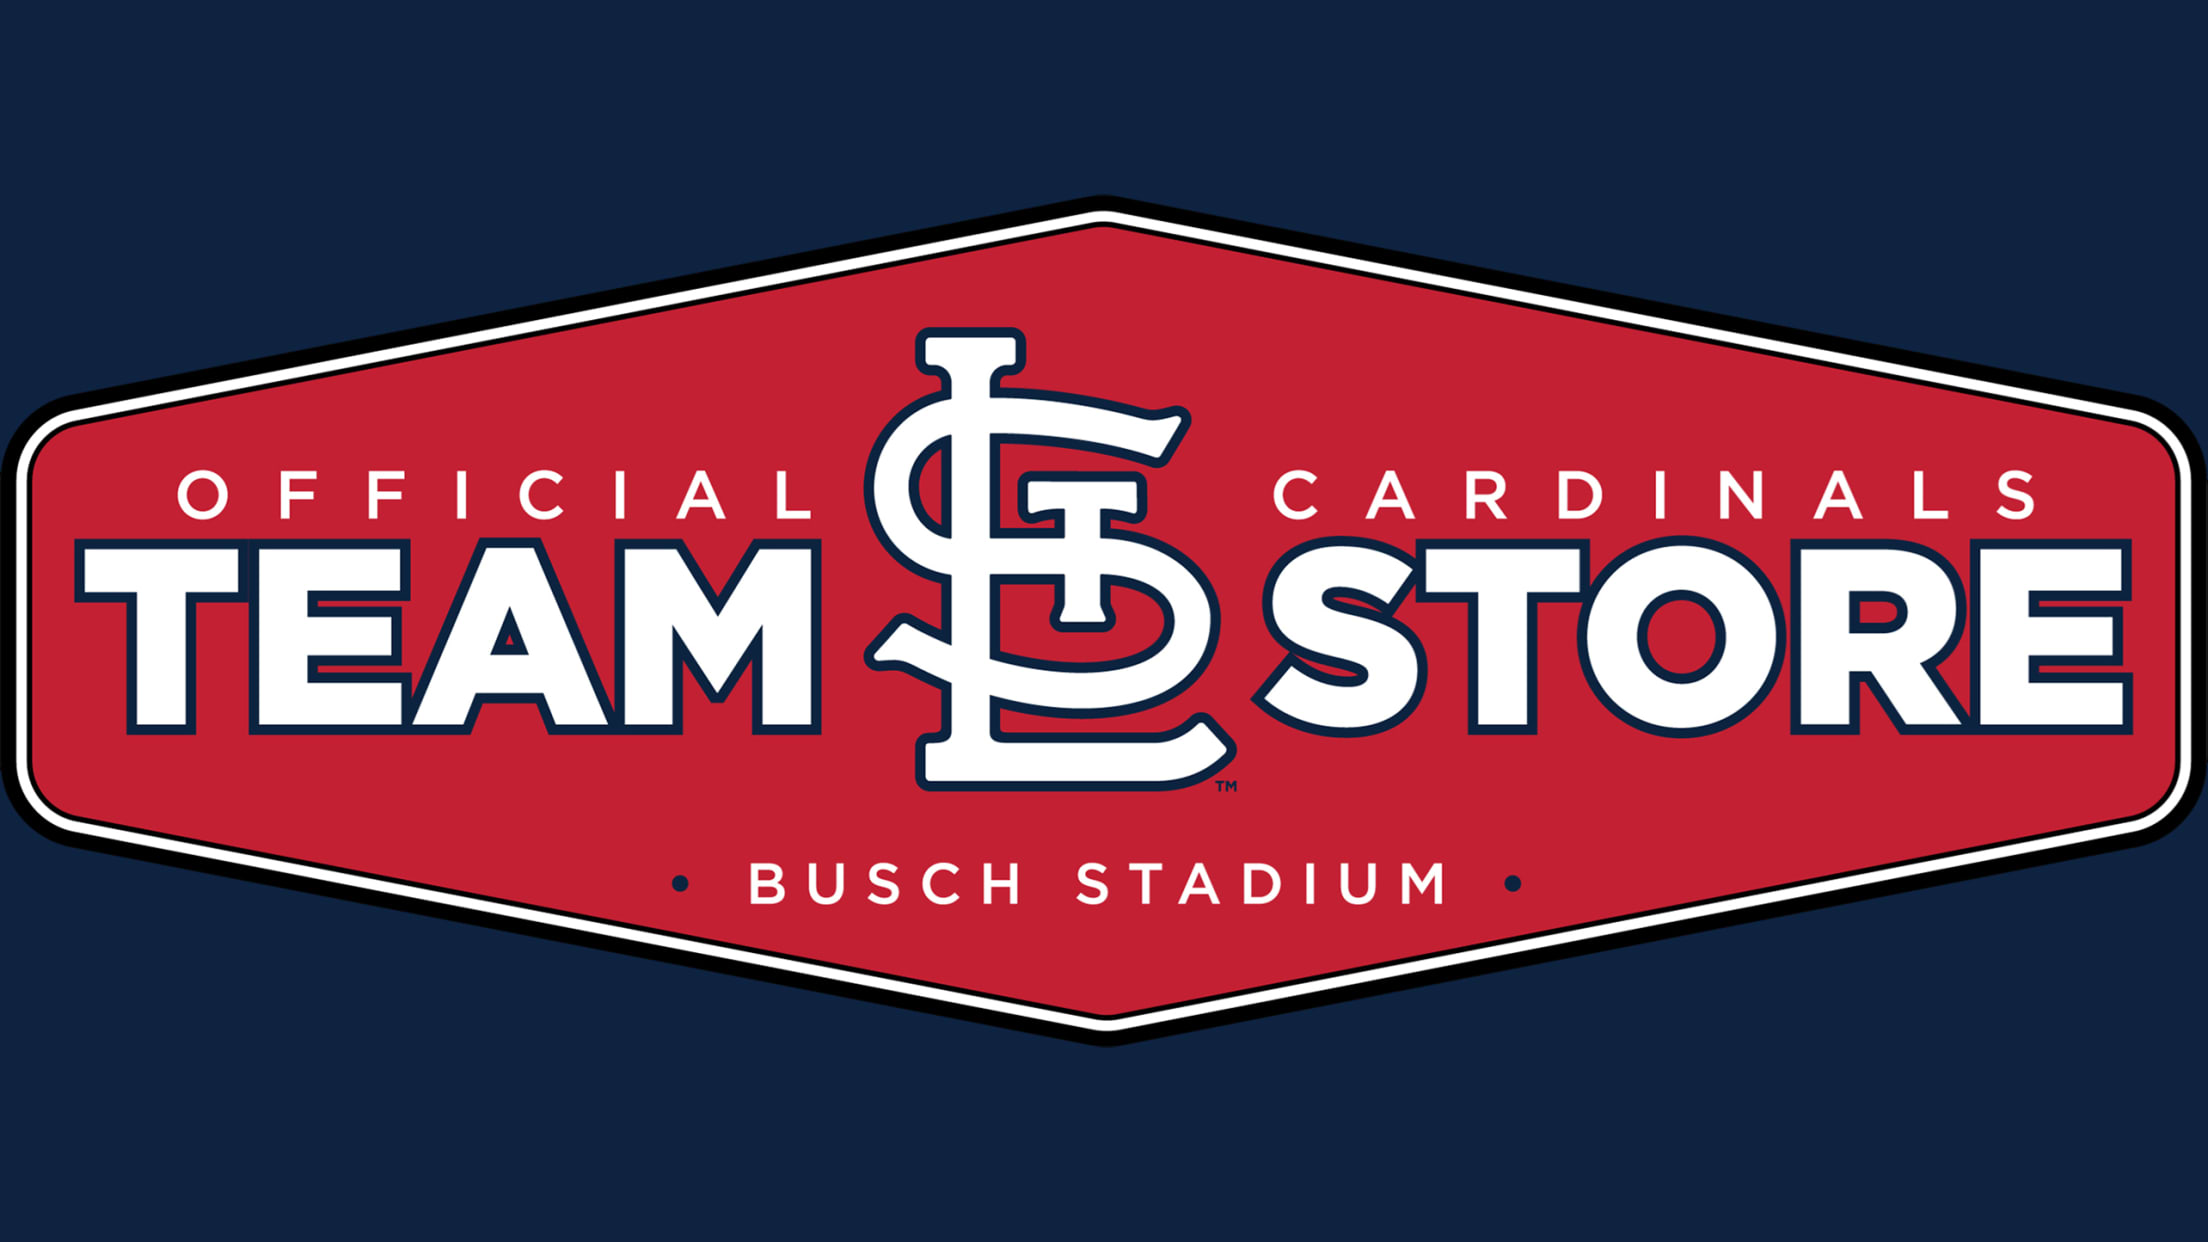 St Louis Cardinals Gift For Fan T-Shirt - Ink In Action